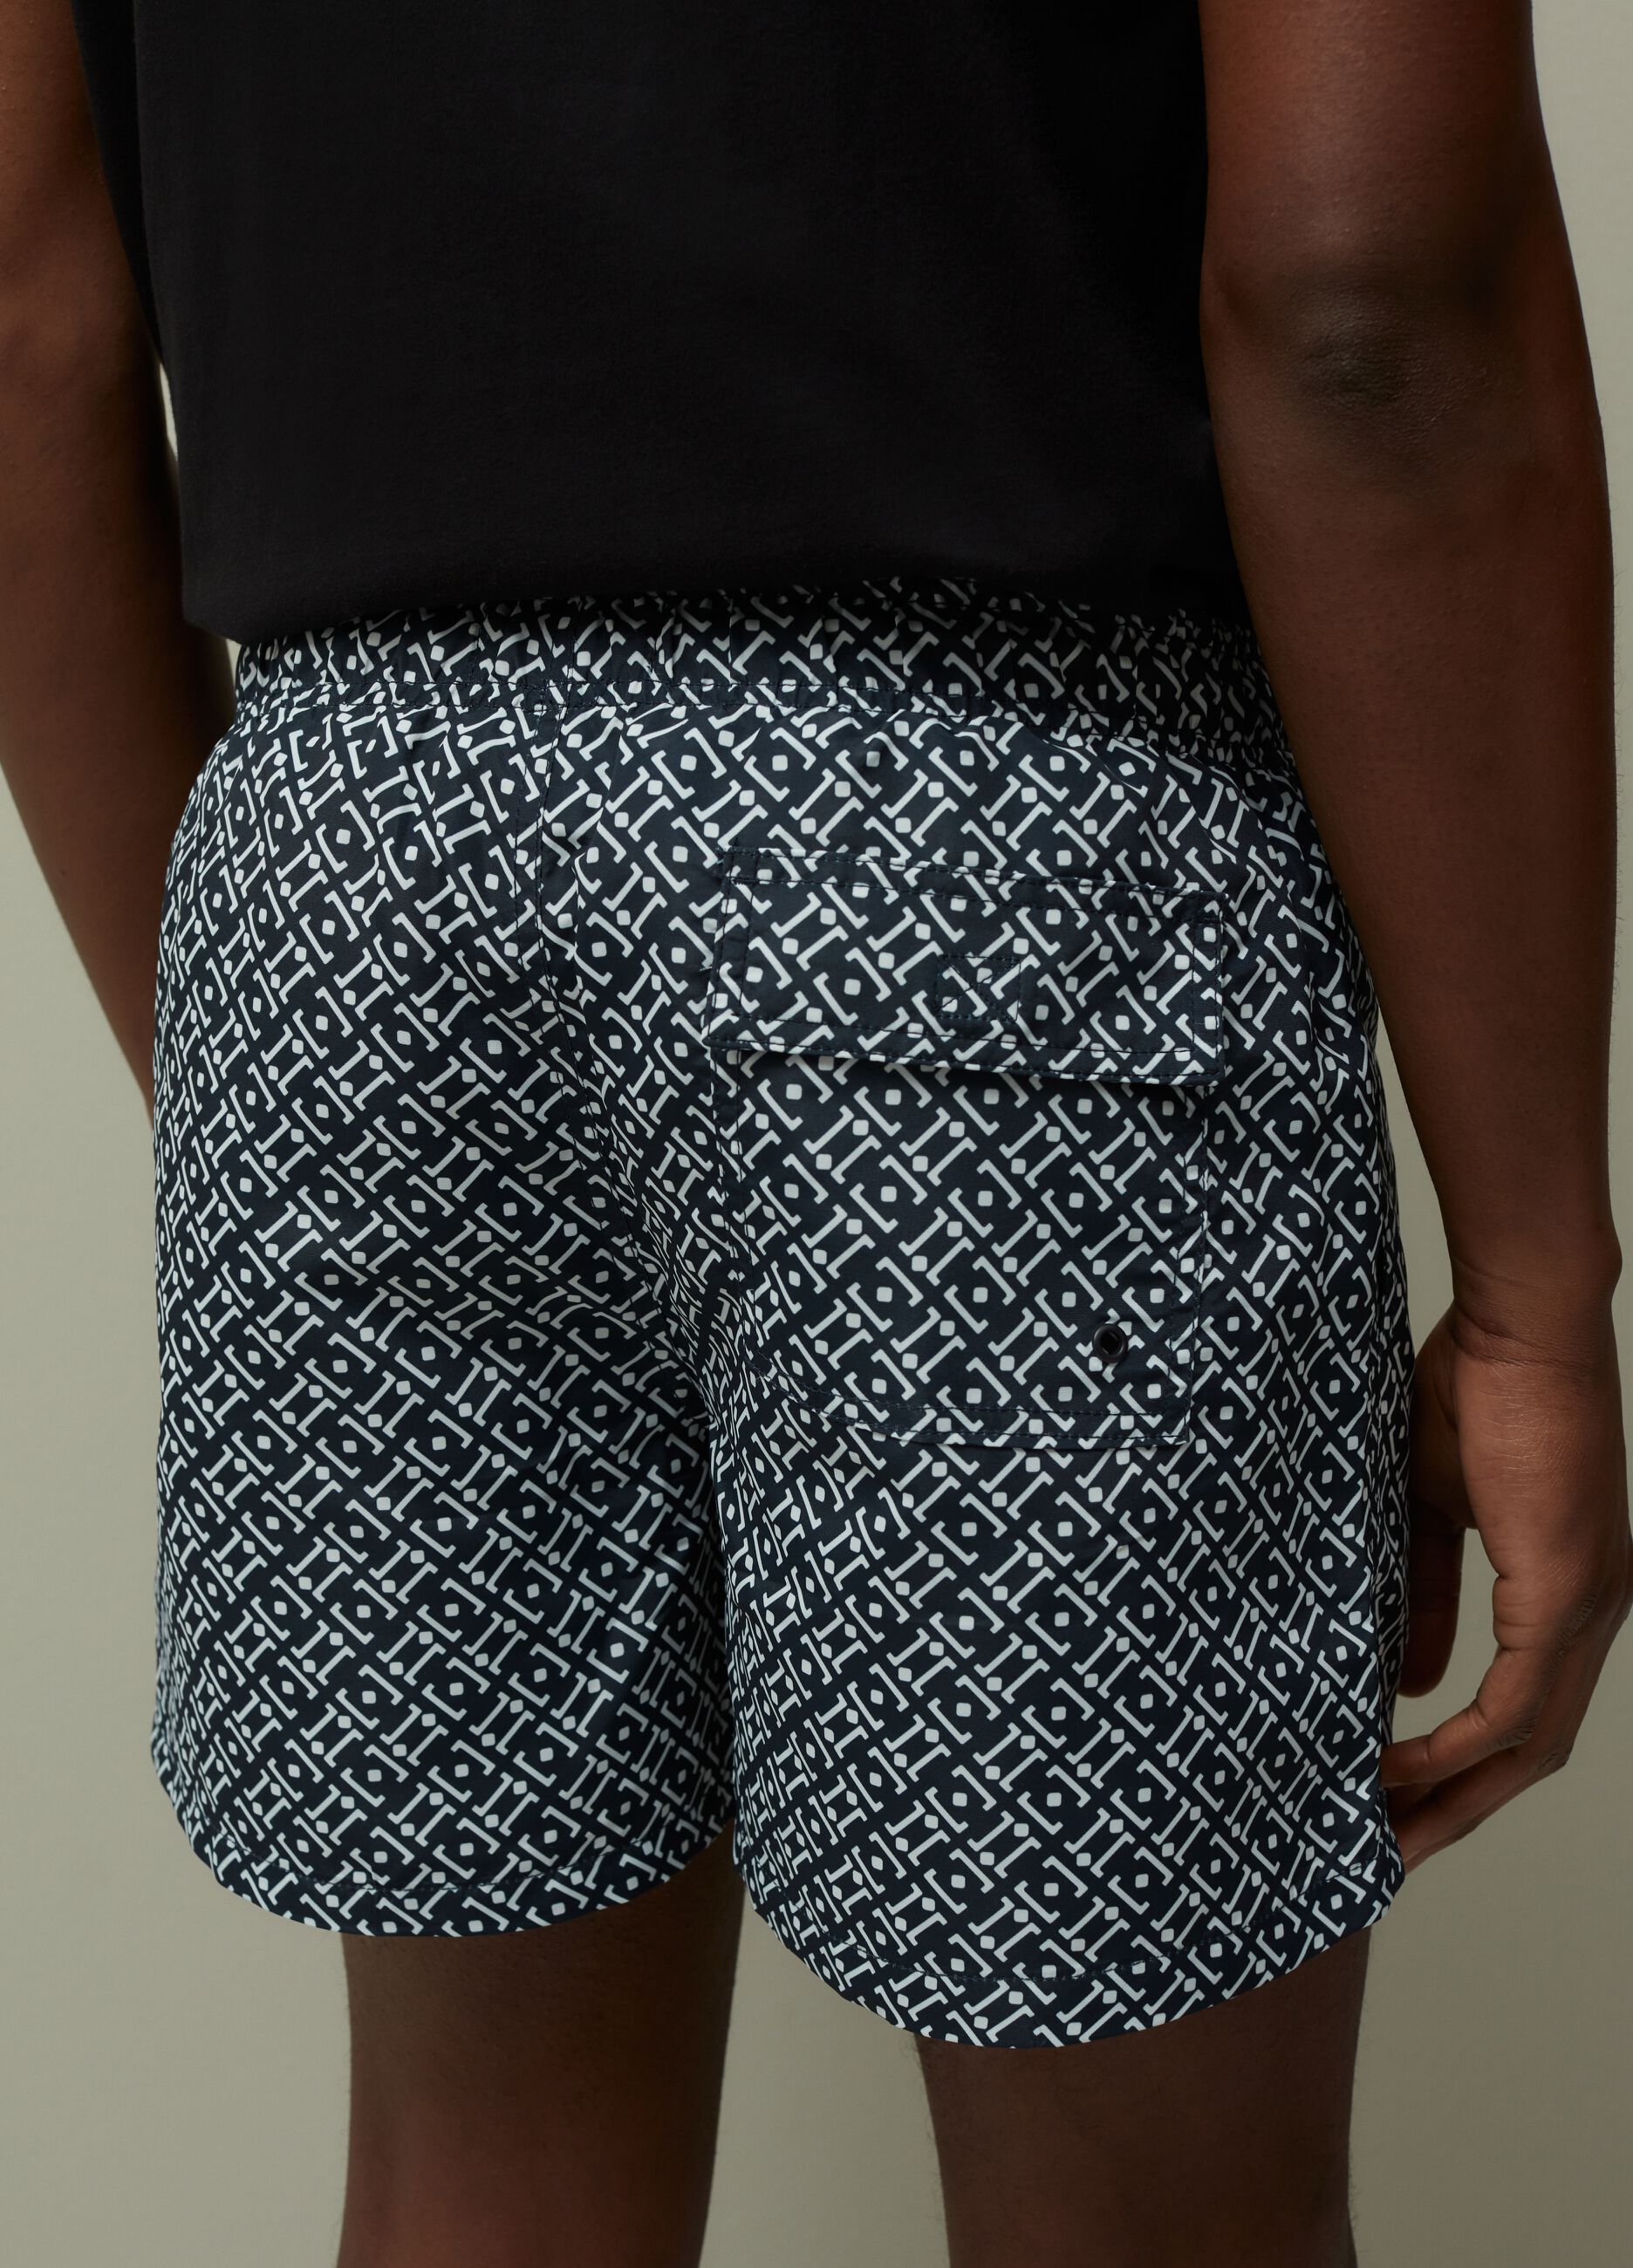 Swimming trunks with print